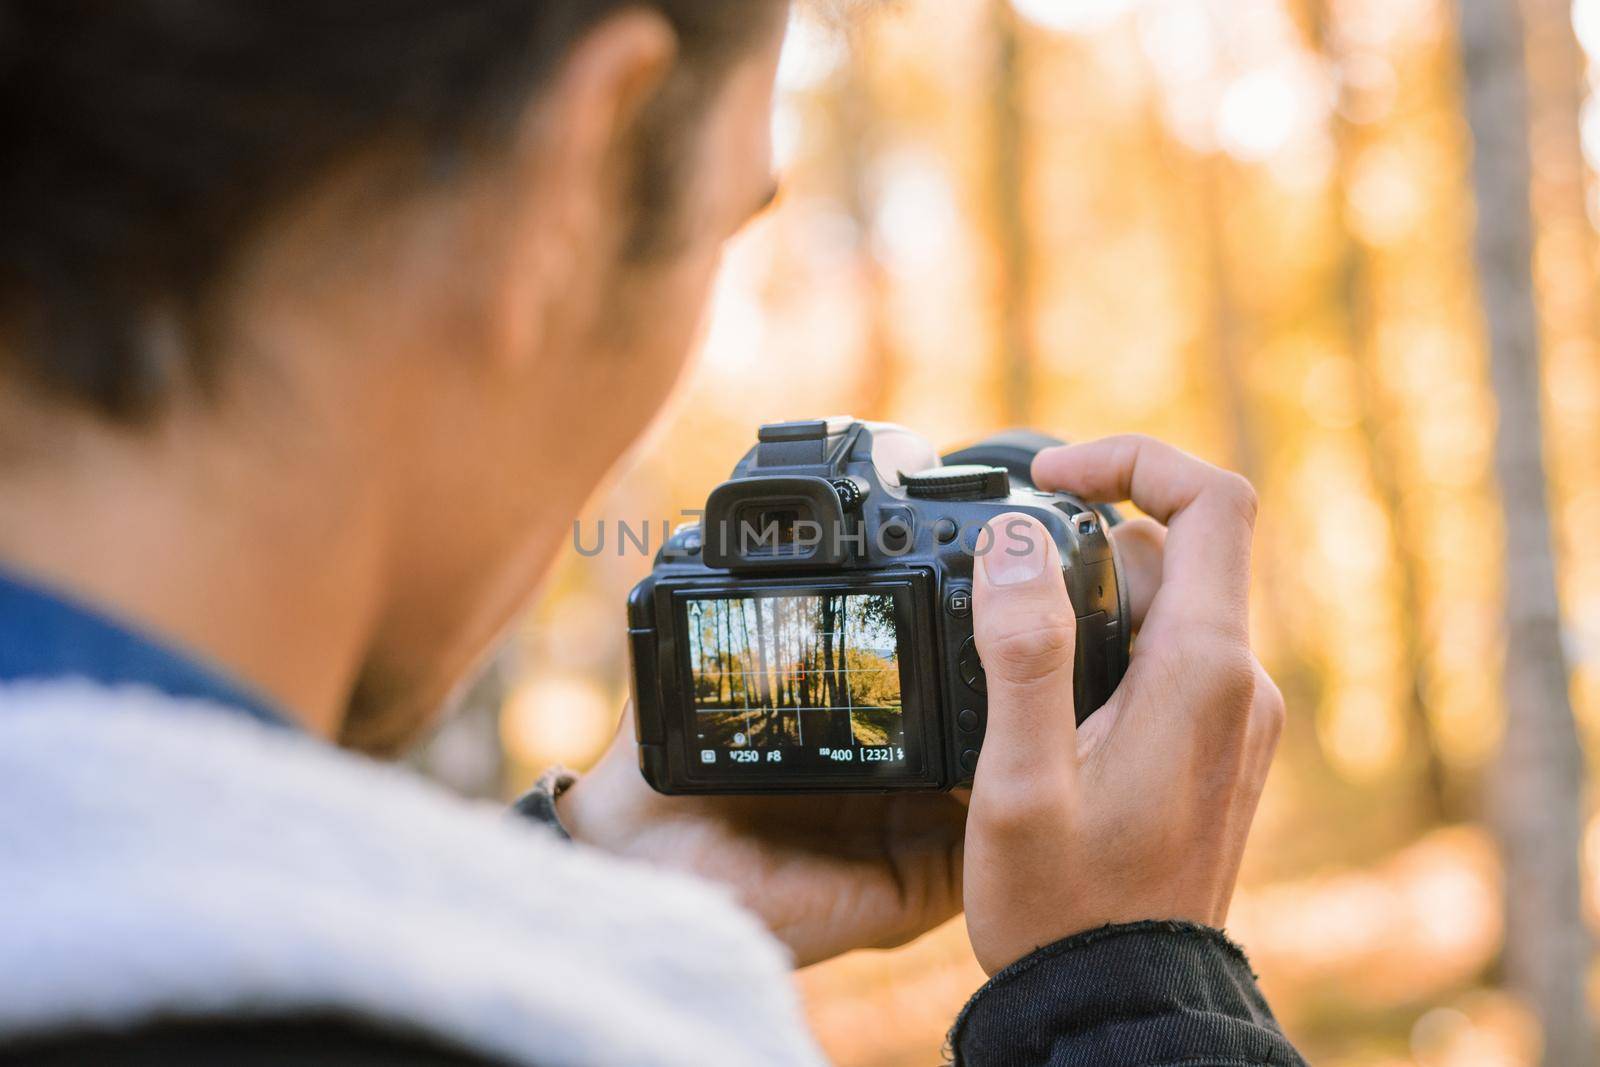 Passionate nature photographer shooting photos and videos in autumn forest, using his modern professional camera to catch beautiful moments of fall